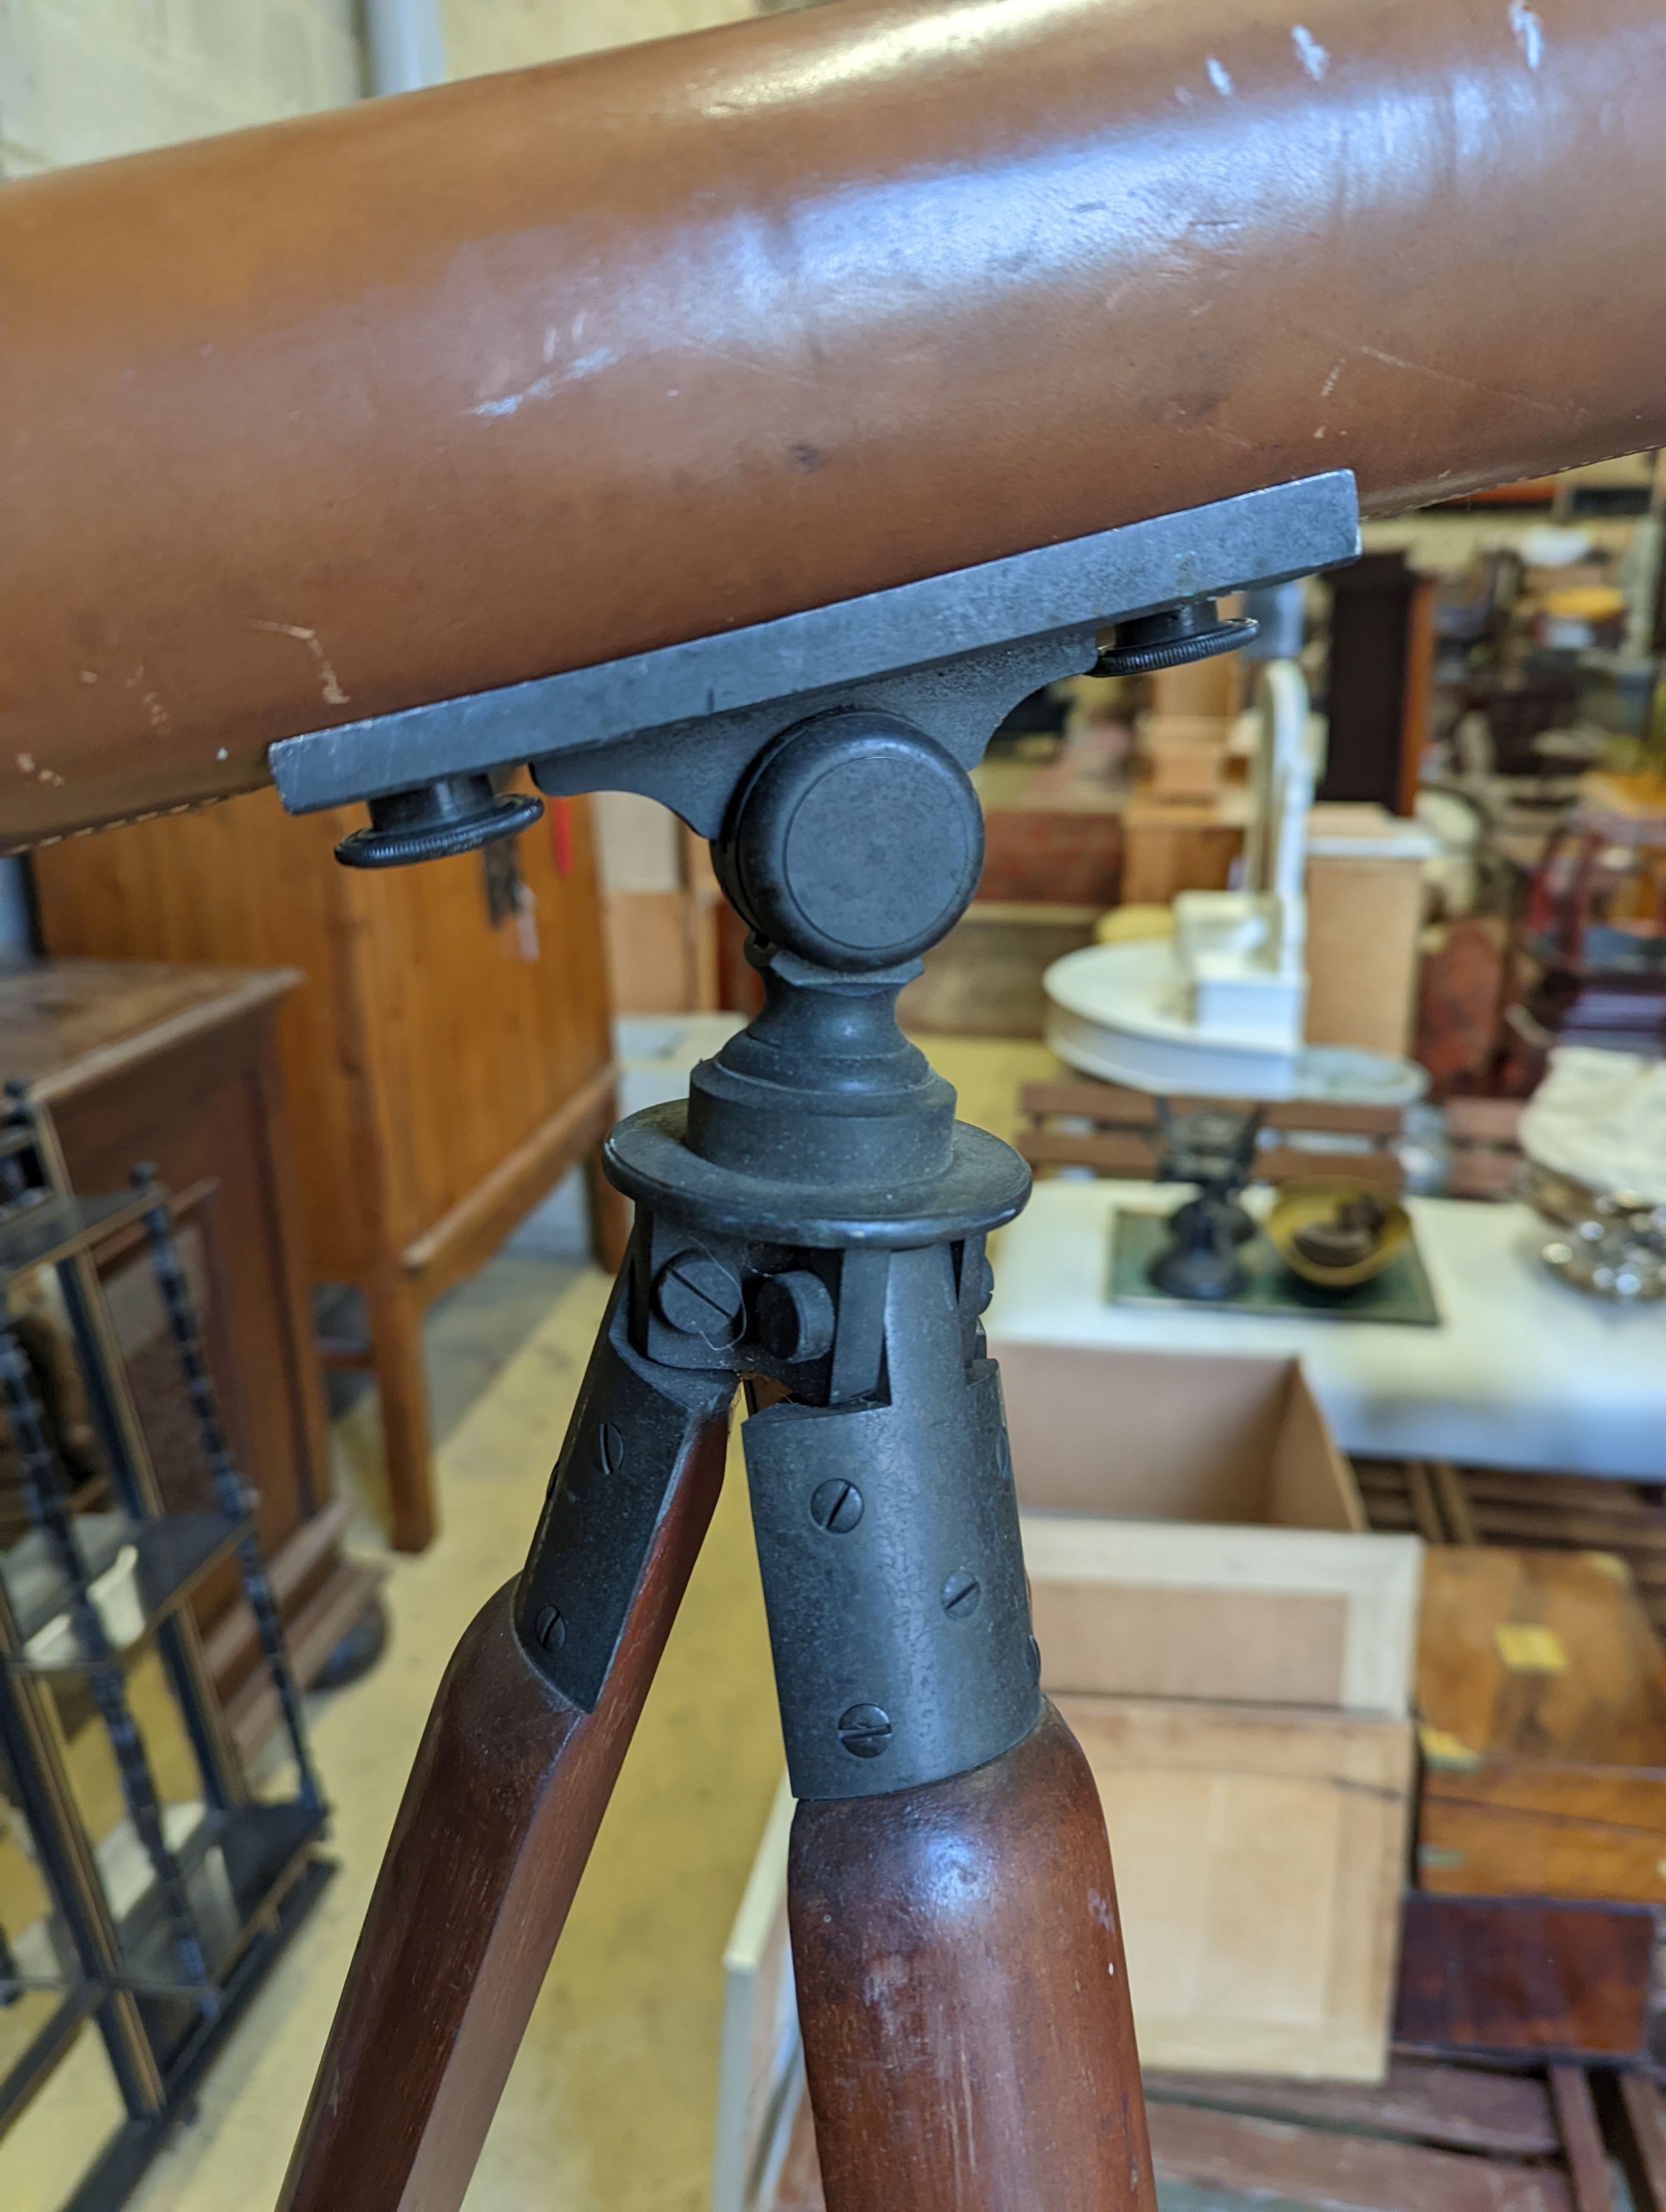 A Victorian telescope on a stand